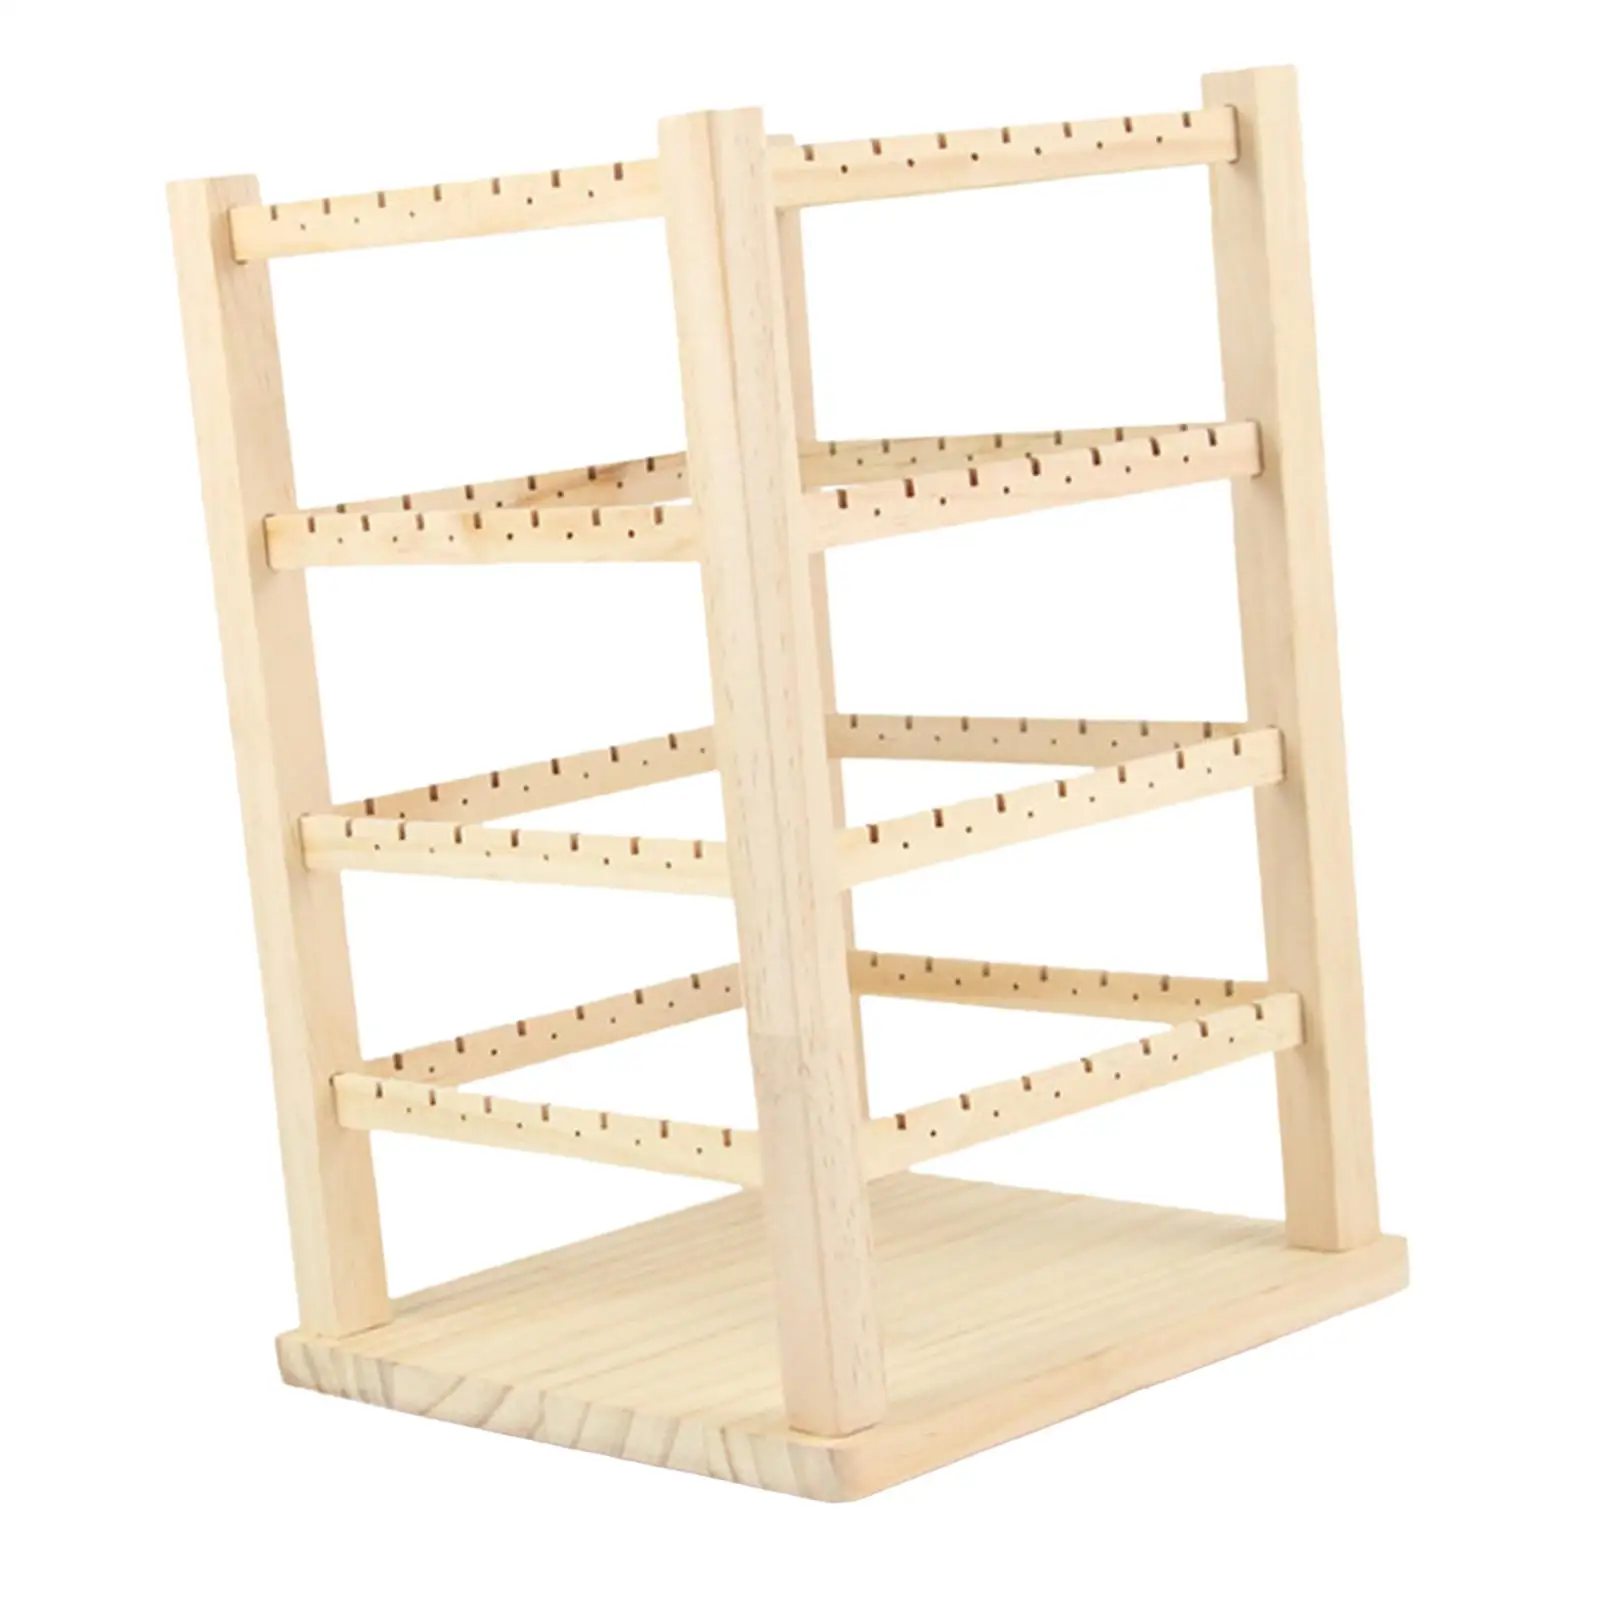 Earrings Display Stand Rotated Organizing Rack Organizer Holder for Bedroom